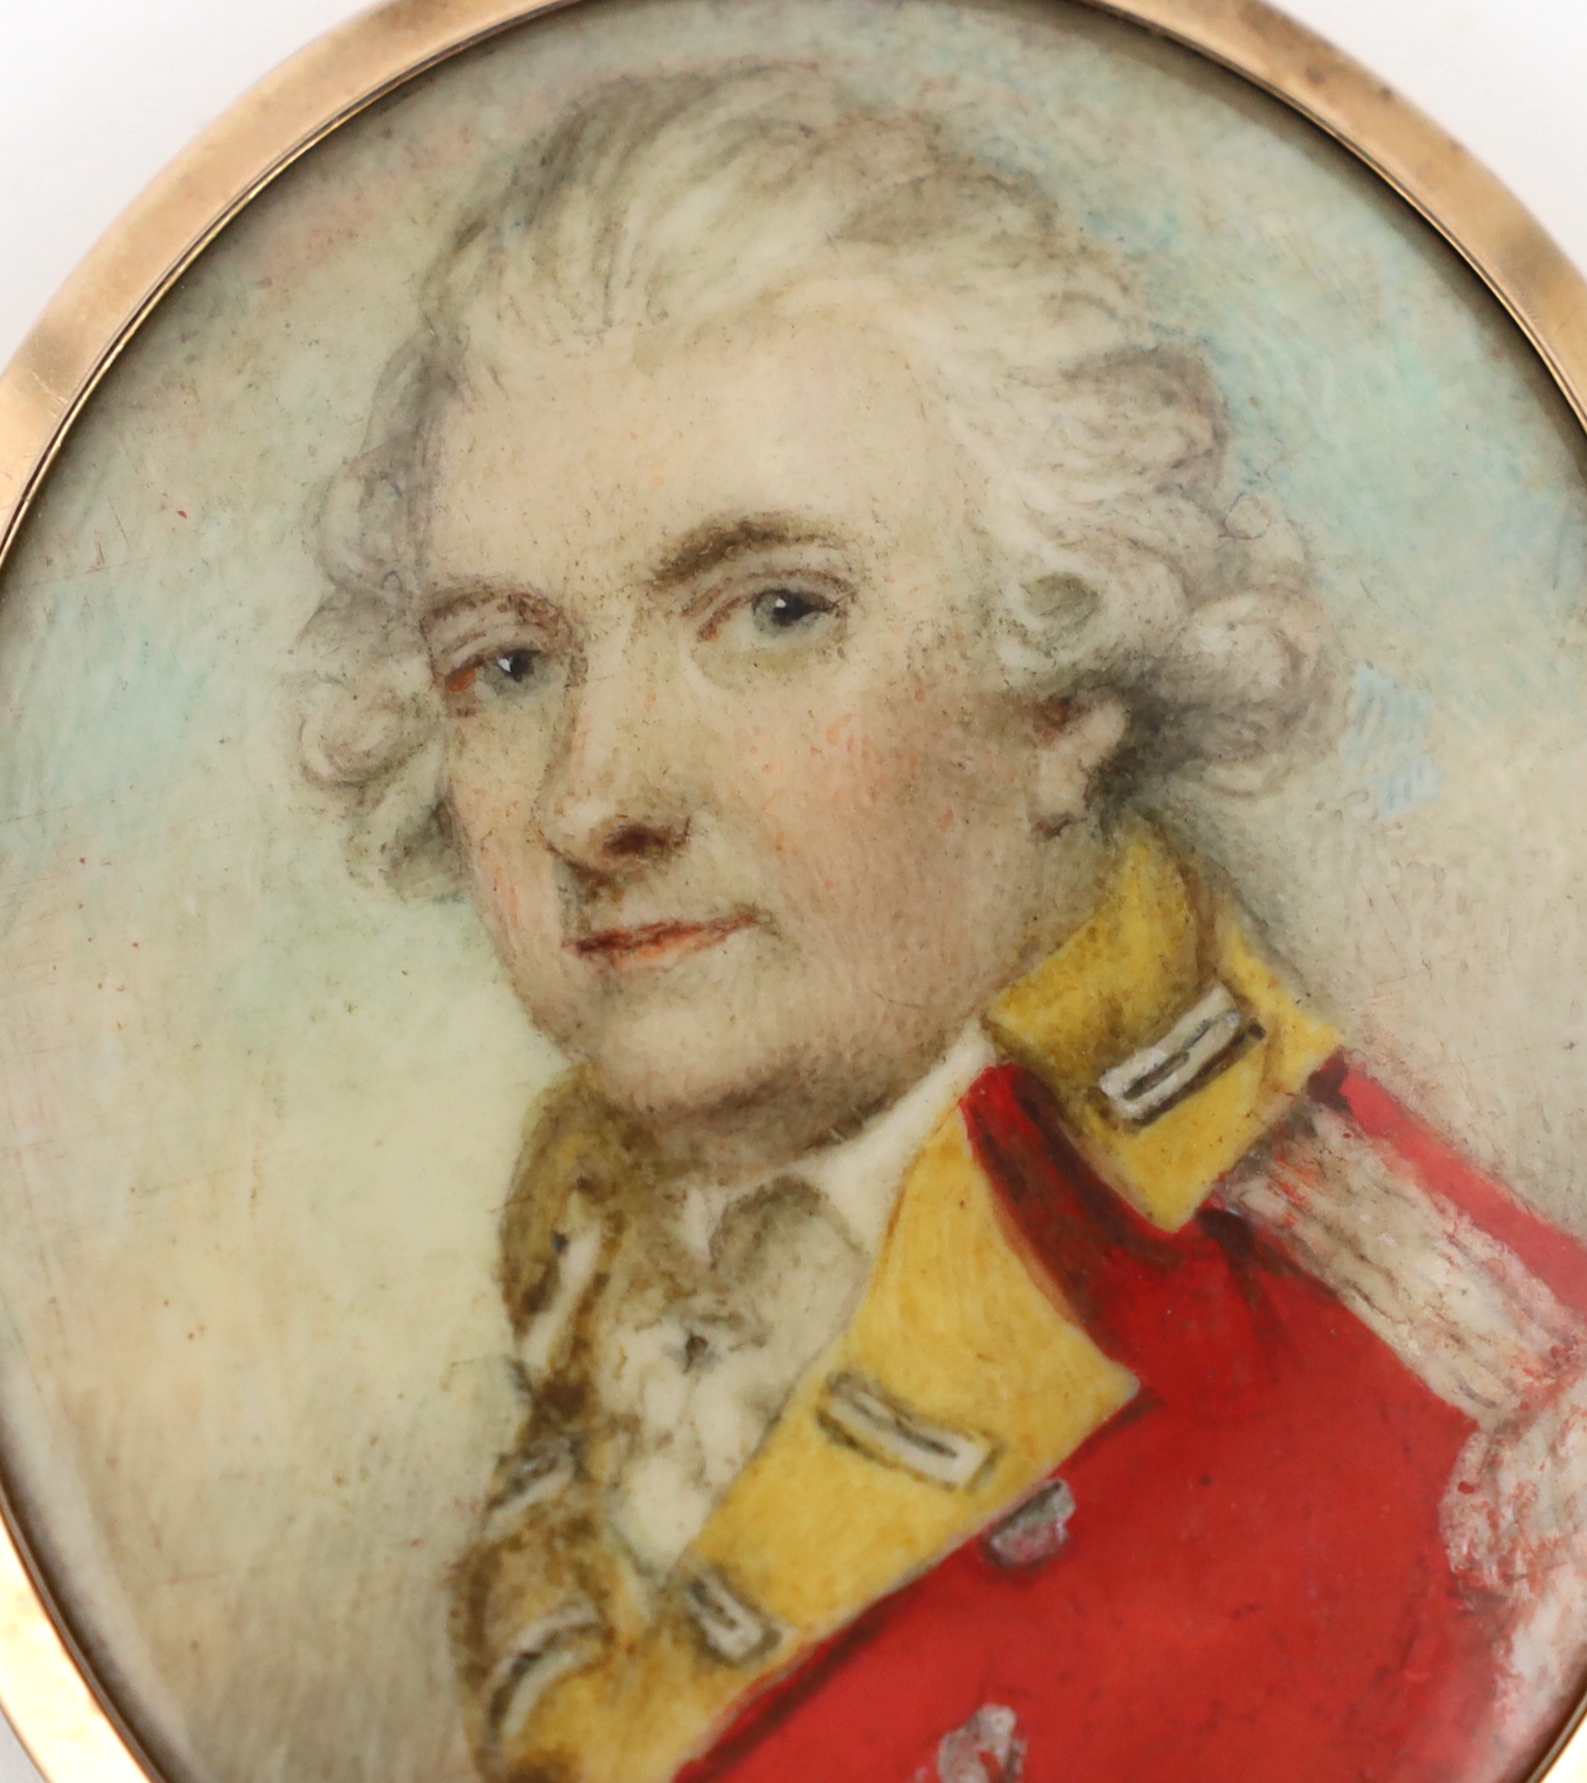 Attributed to William Wood (English, 1769-1810), Portrait miniature of an army officer, watercolour on ivory, 5.4 x 4.4cm. CITES Submission reference QDFNZGPC